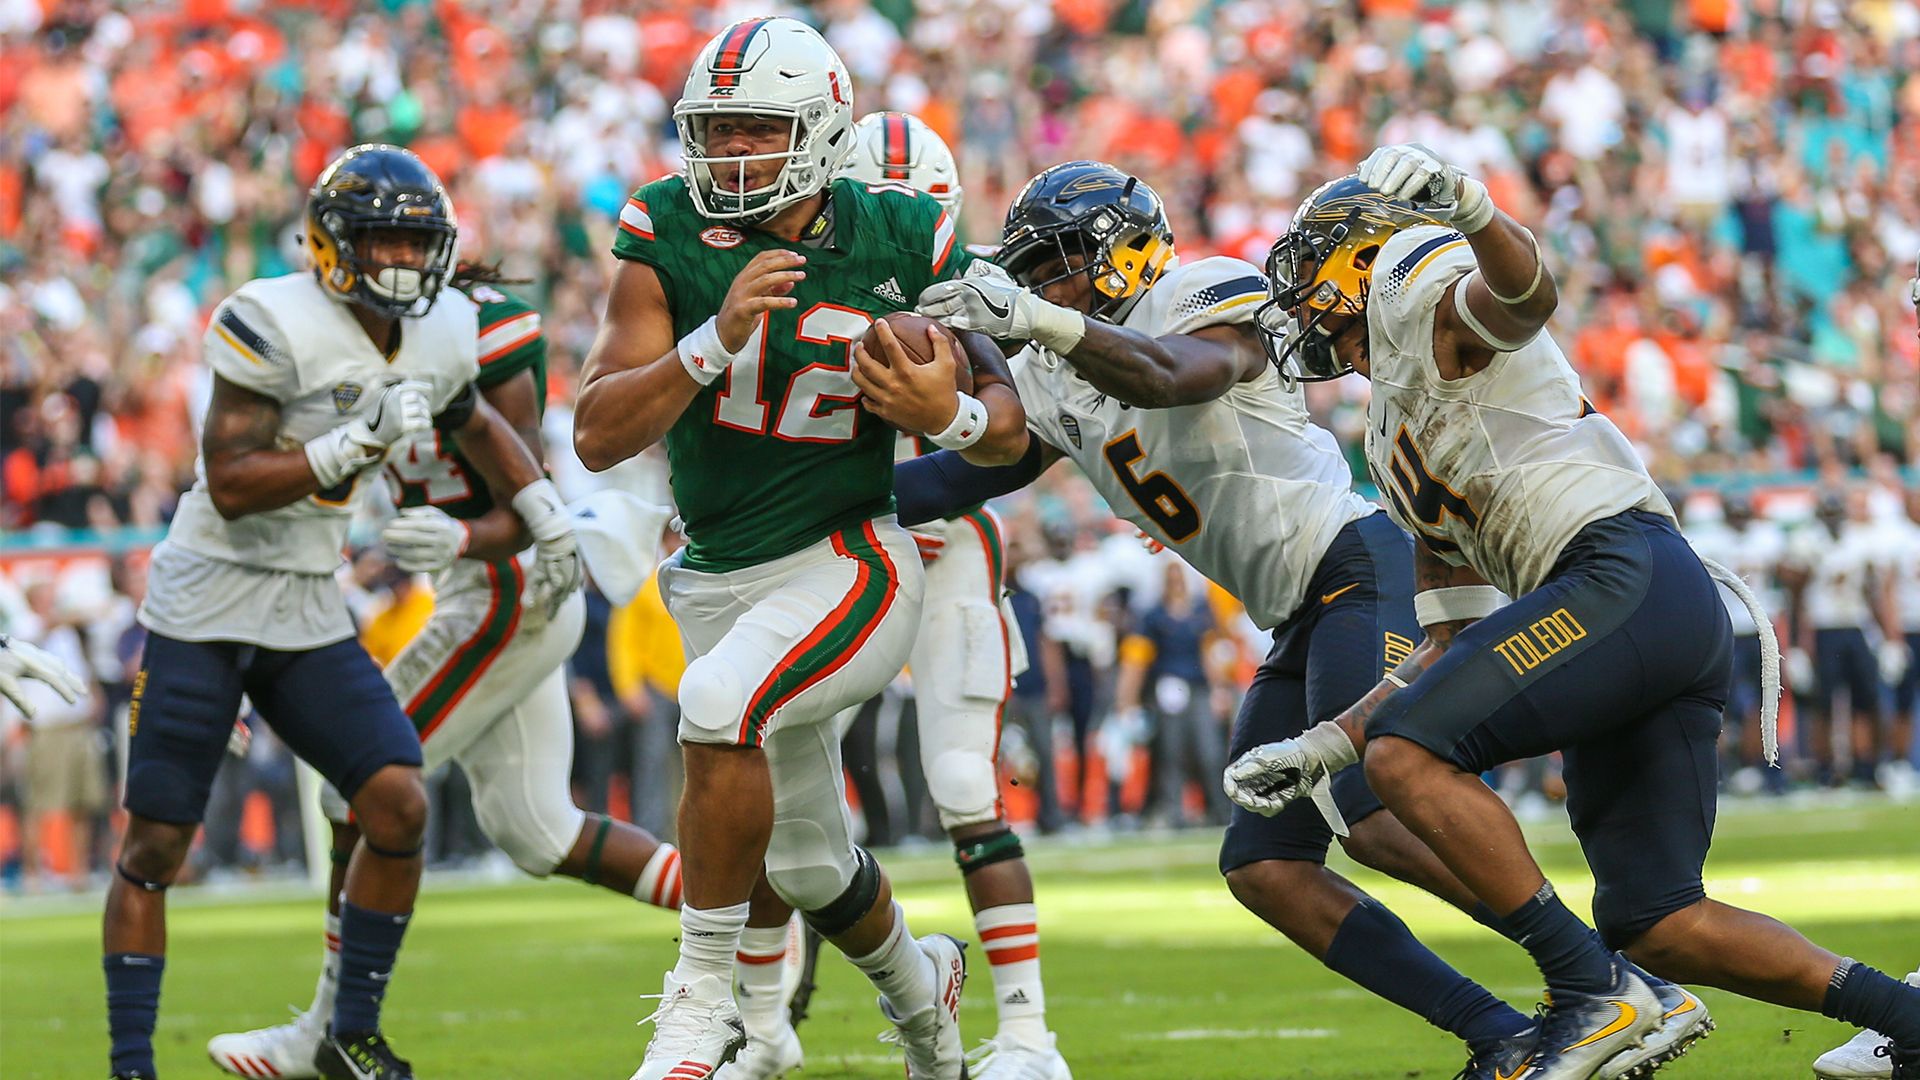 Canes Ready for Battle at Toledo